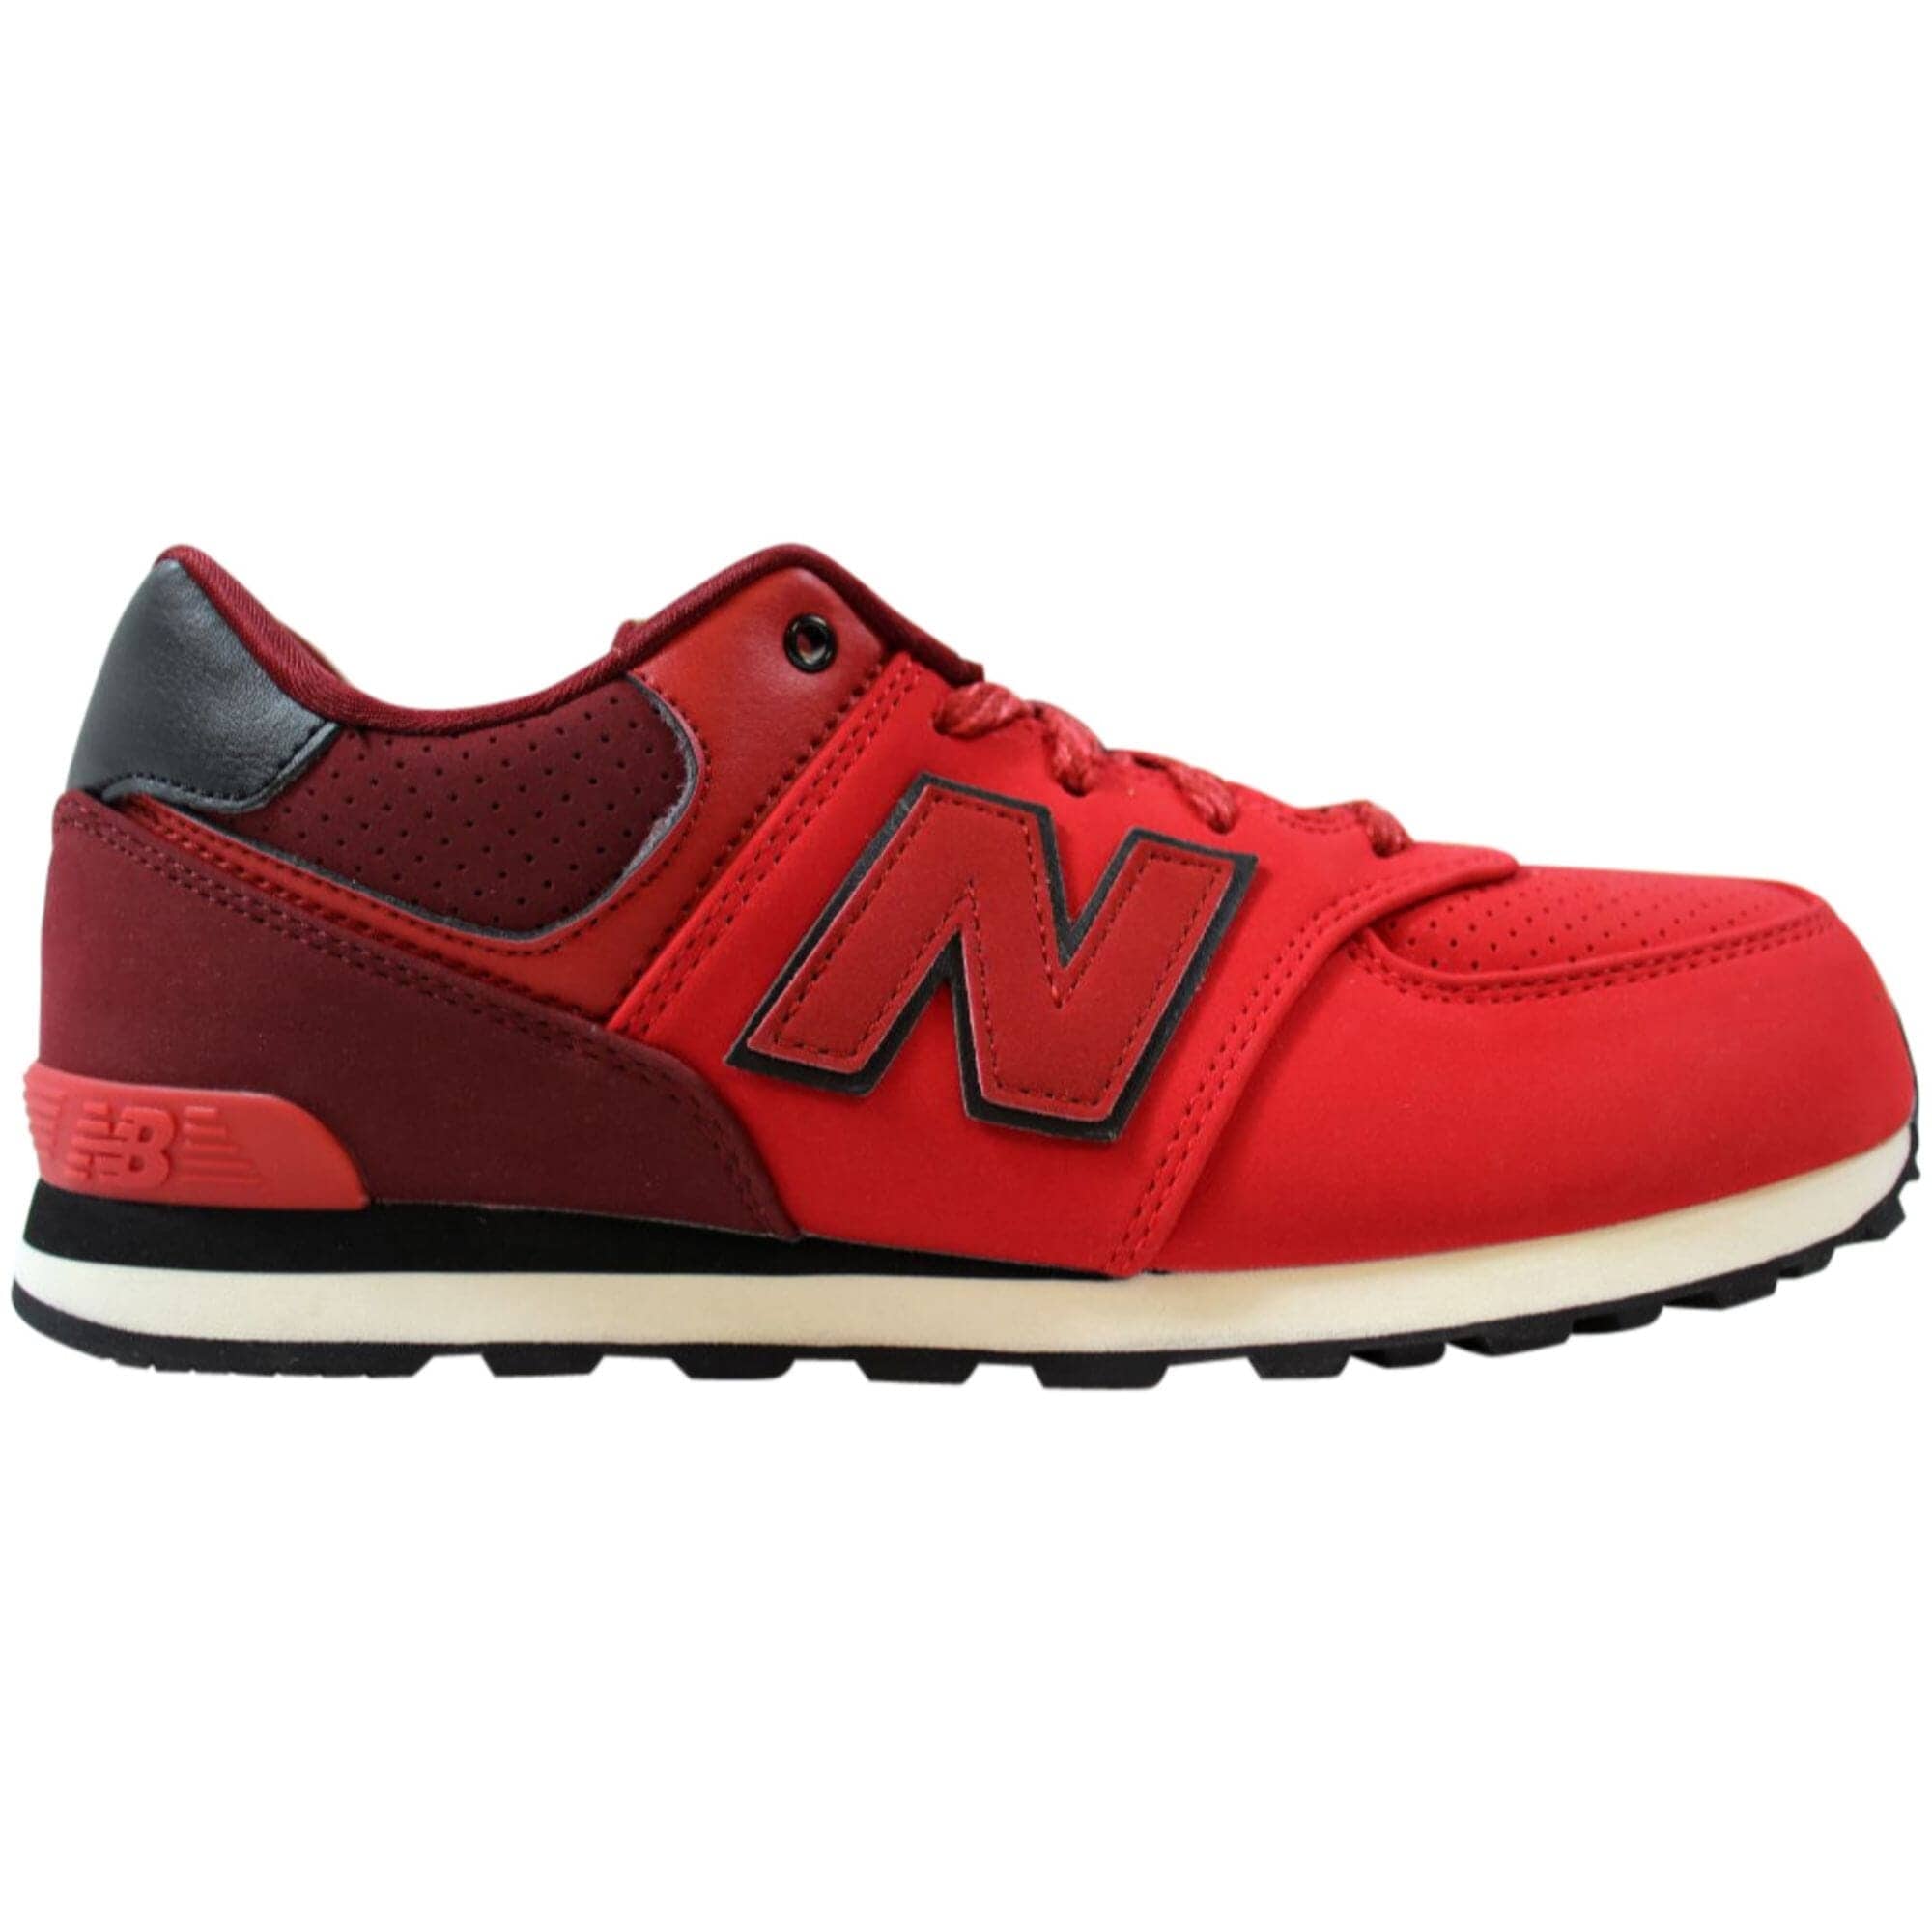 New Balance 574 Wide Clearance Sale, UP TO 64% OFF